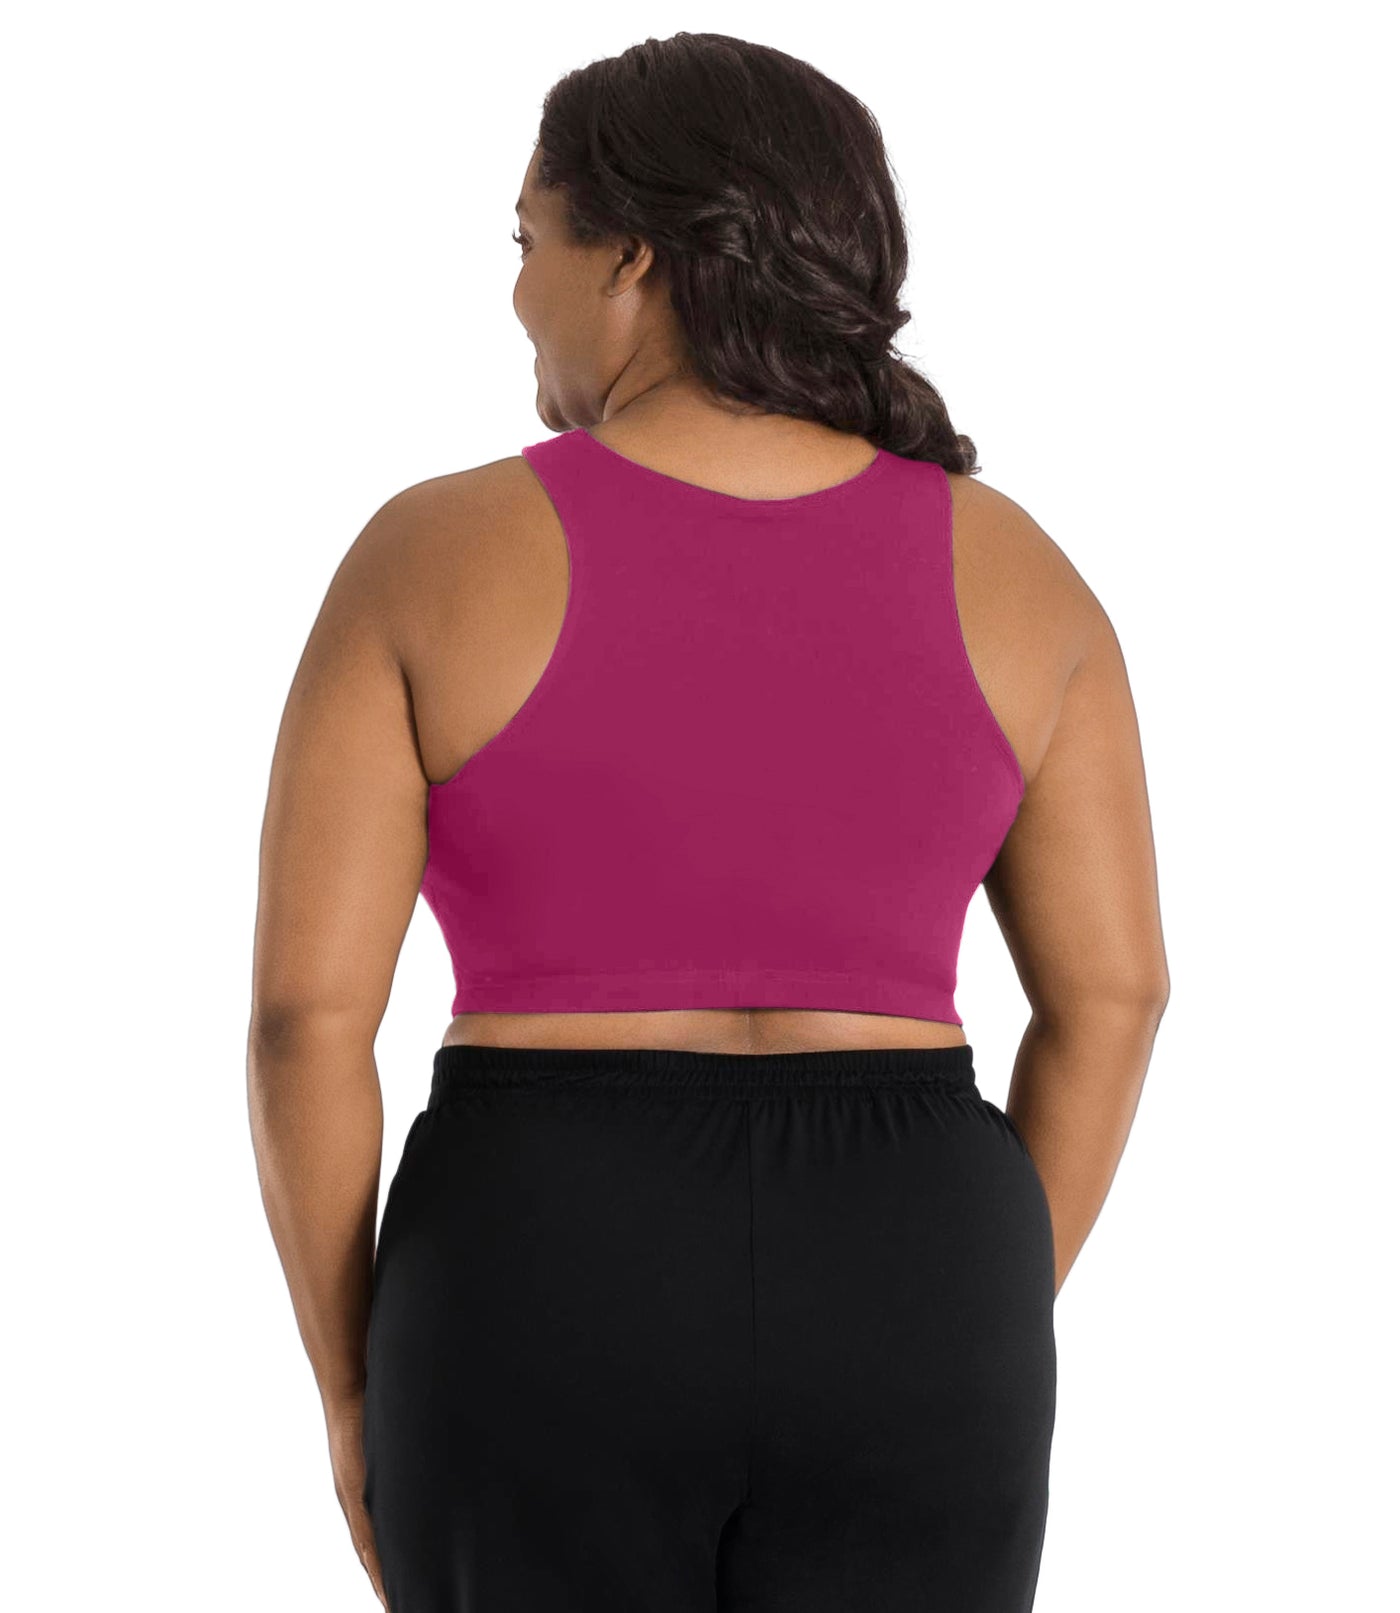 A plus size woman, facing back, wearing a merlot colored JunoActive Stretch naturals full fit plus size bra. Featuring a v-neck and side bust darts for a full fit. She is also wearing black JunoActive plus size pants.